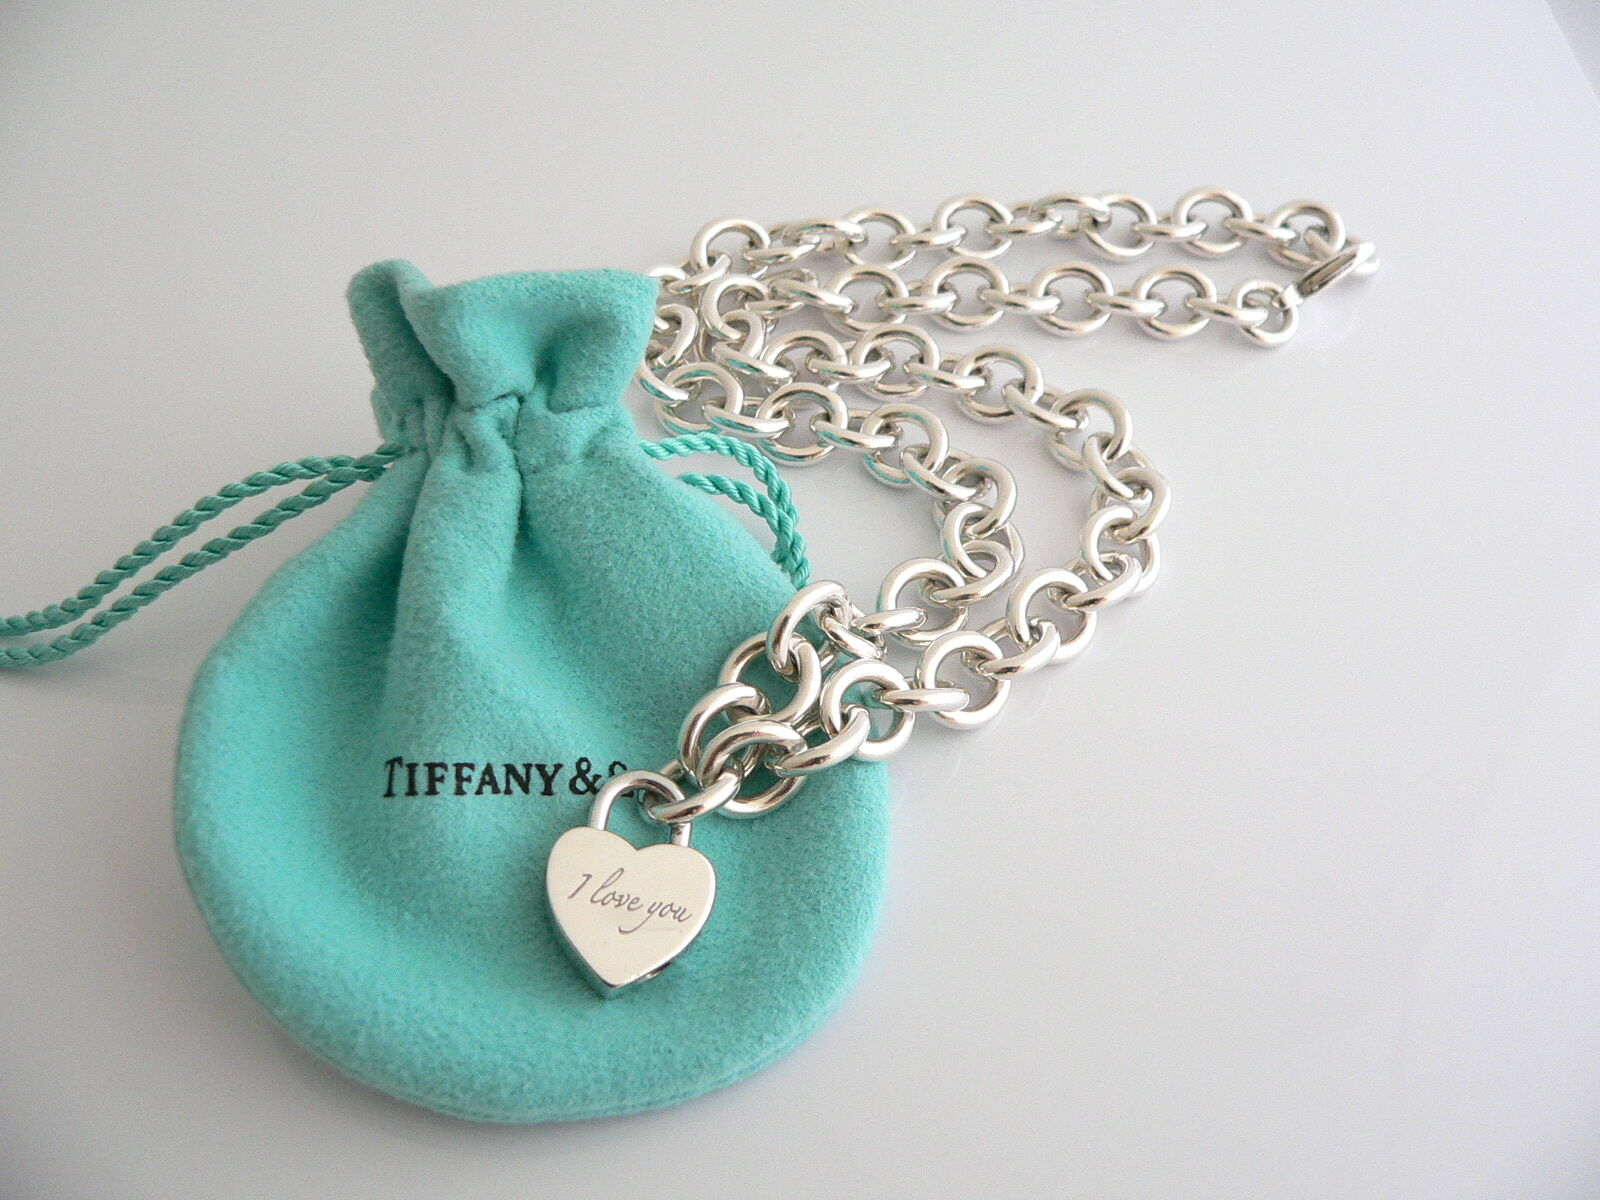 Tiffany & Co.Return to Heart Lock Pendant Necklace Sterling Silver 925  W/Pouch